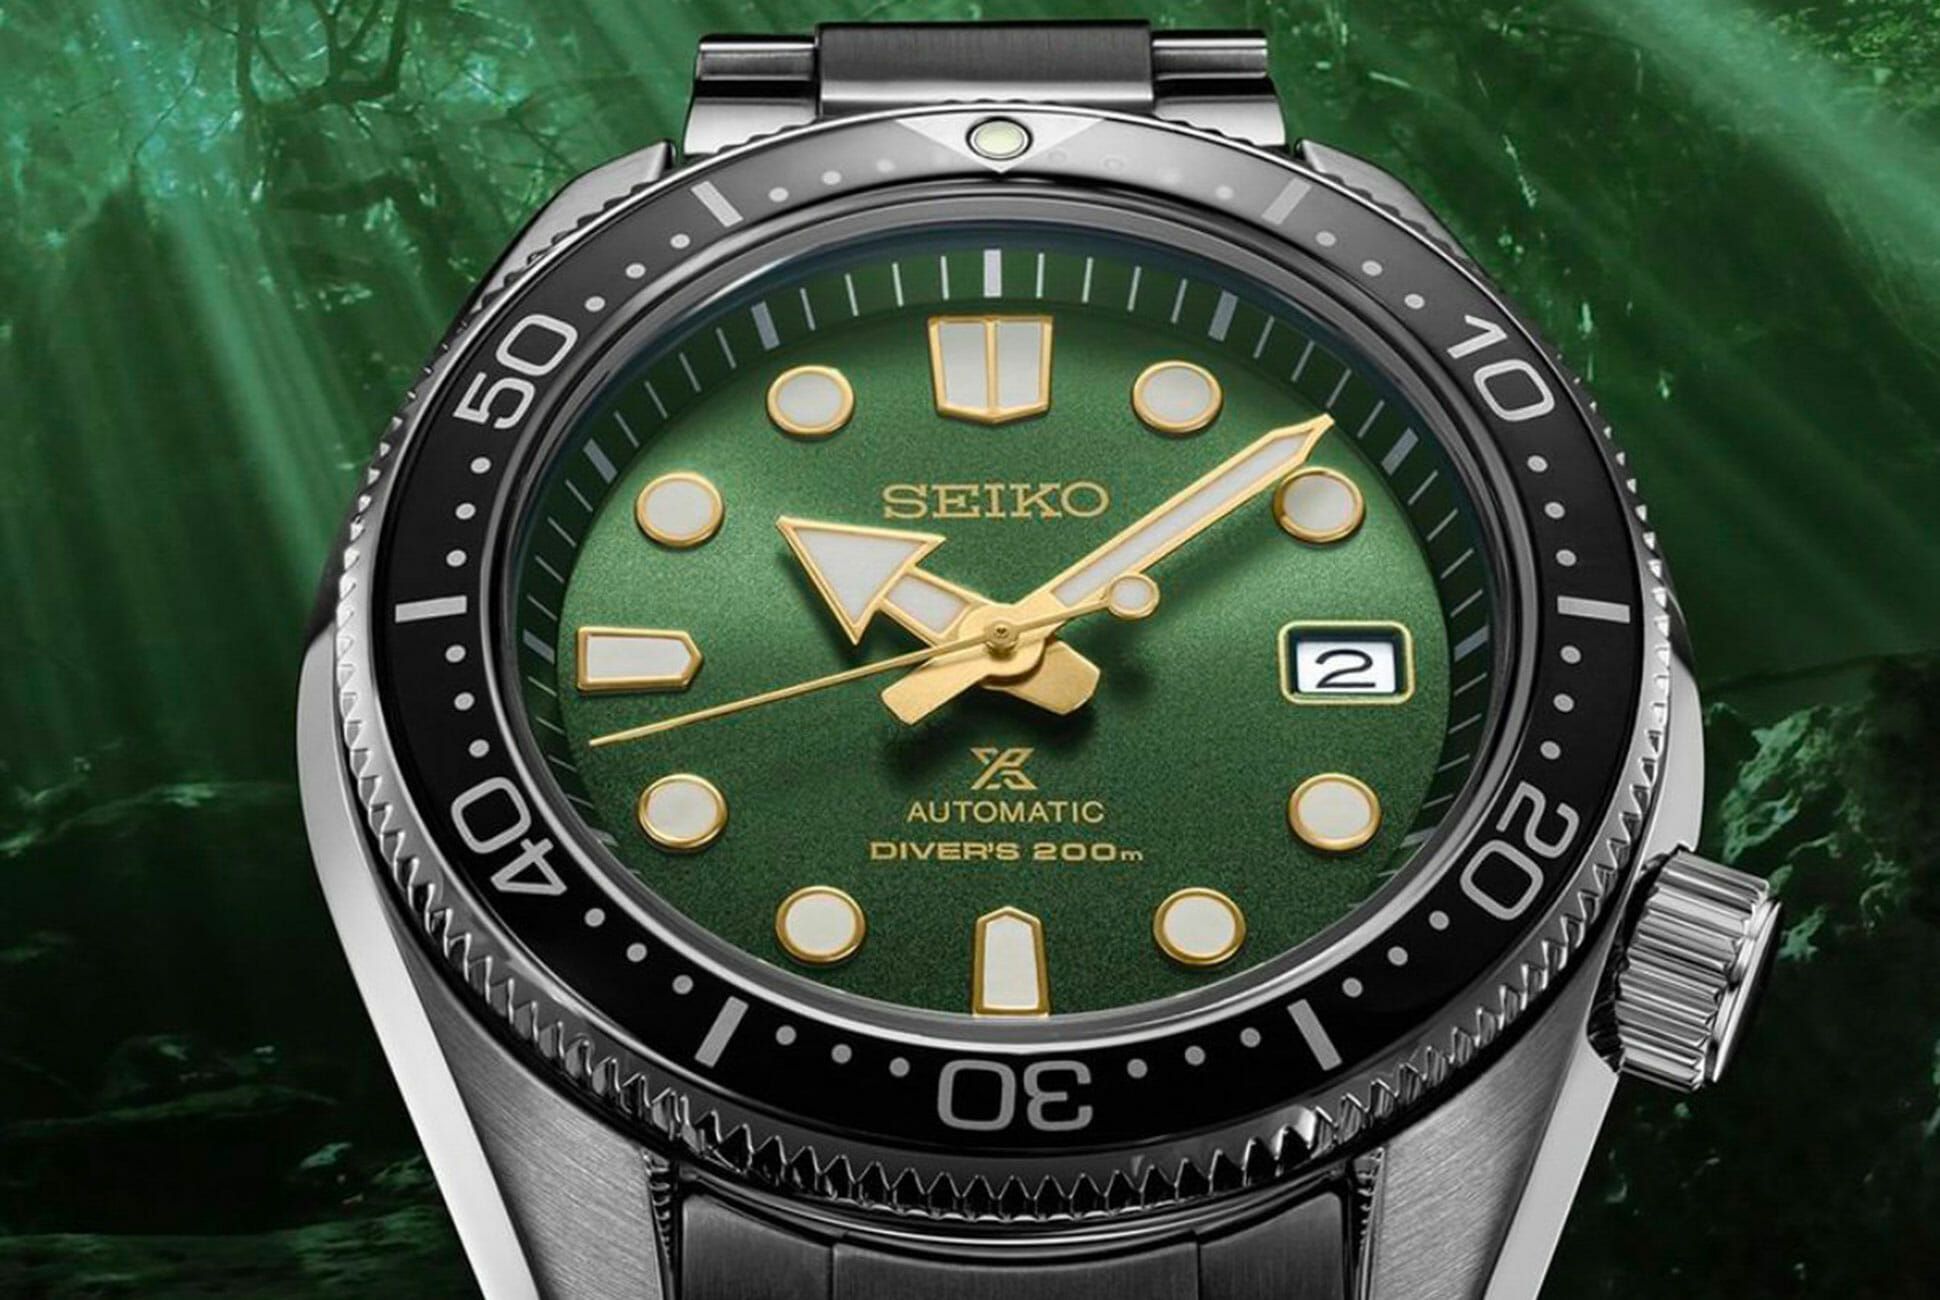 This Might Be the Best Version Yet of Seiko's Vintage-Inspired Dive Watch